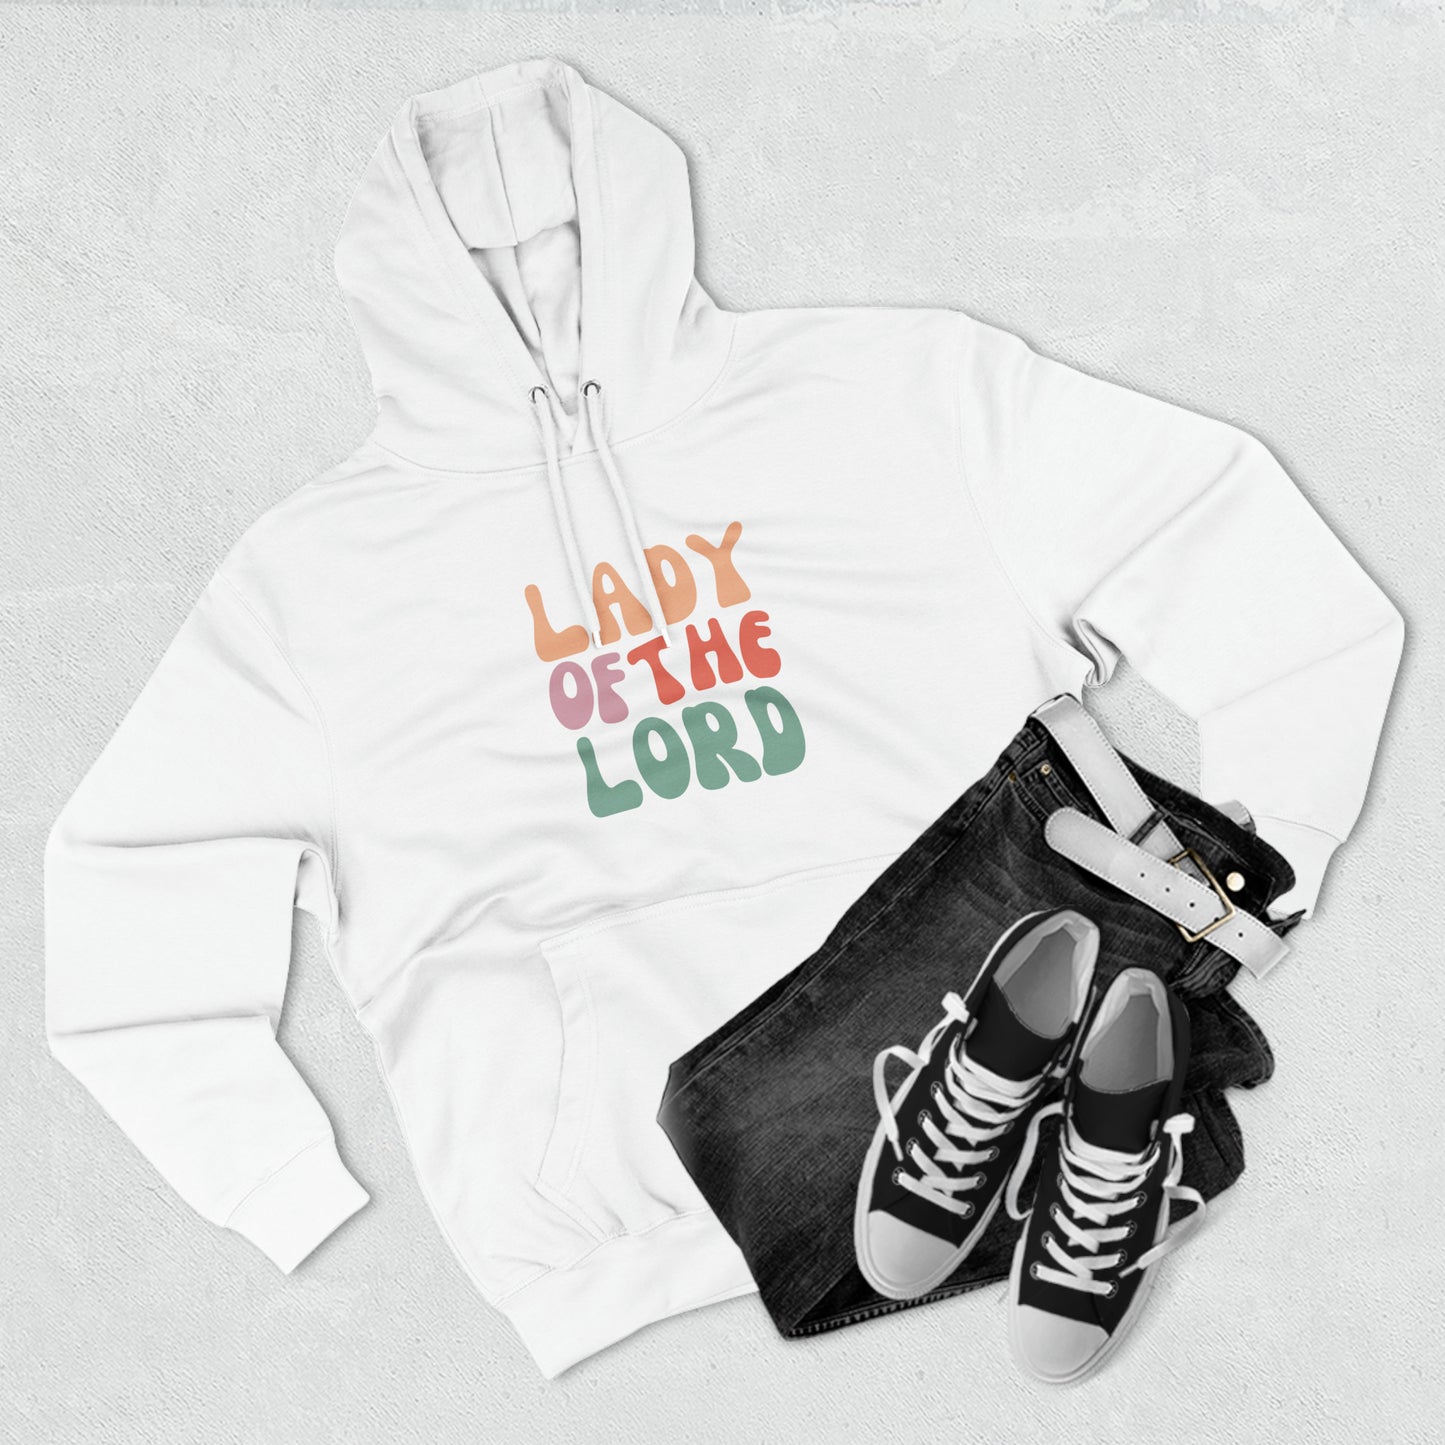 Lady of the Lord, Three-Panel Fleece Christian Hoodie for Women